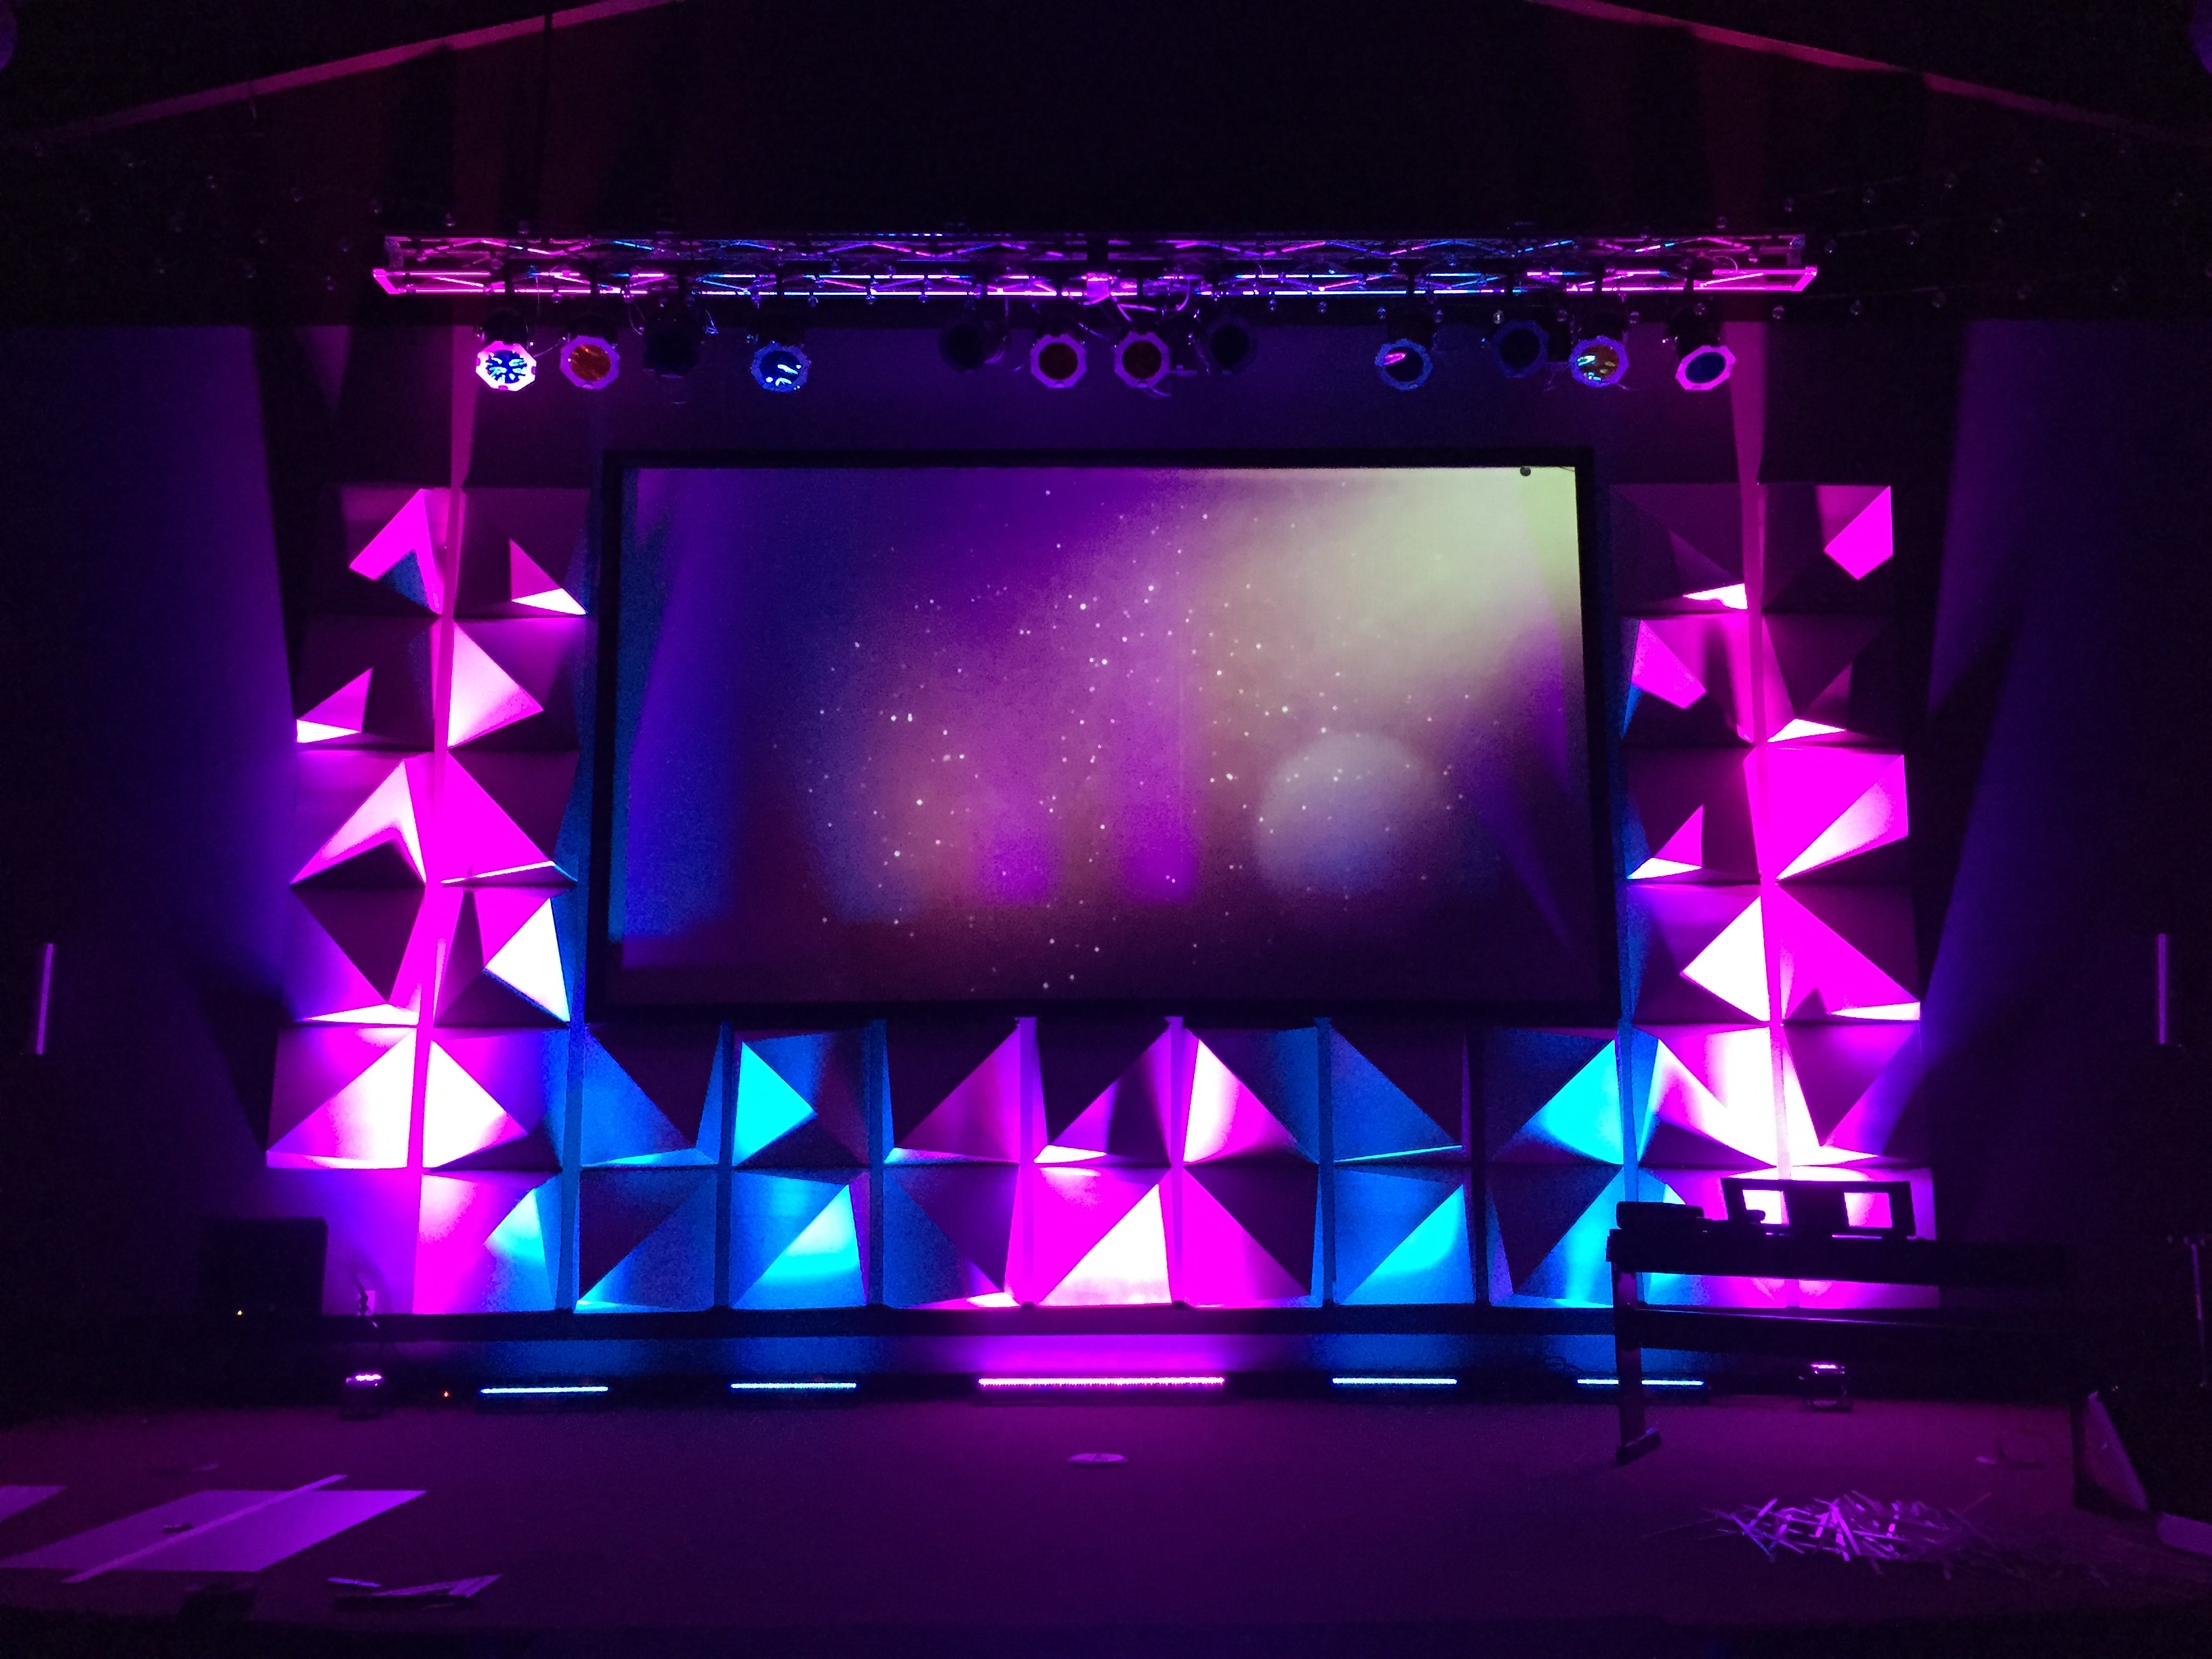 Stage Design Ceiling Tiles Stage Design Ceiling Tiles energy shapes church stage design ideas 3264 X 2448